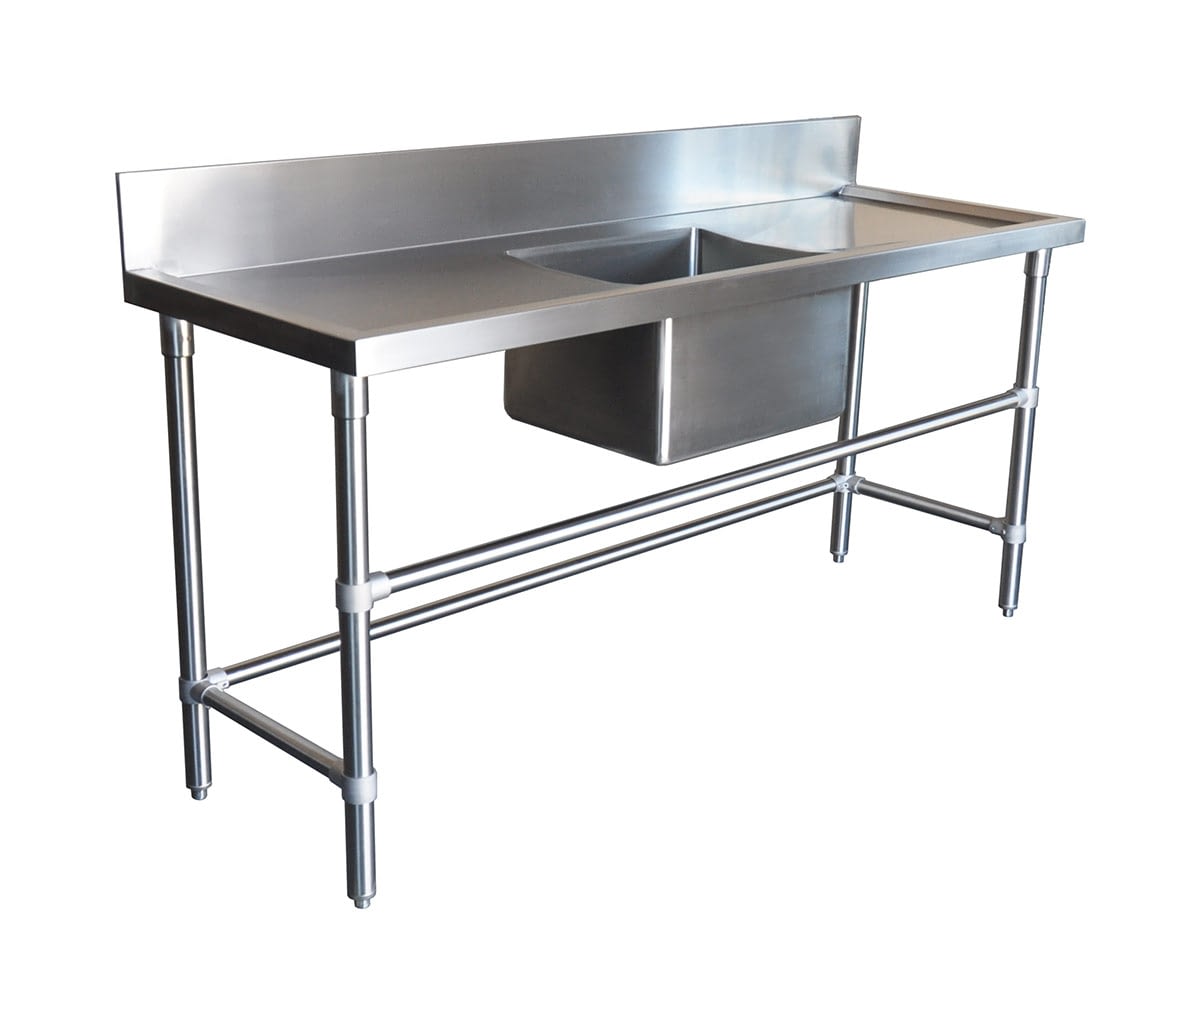 Stainless Steel Catering Sink – Right And Left Bench, 1800 x 610 x 900mm high